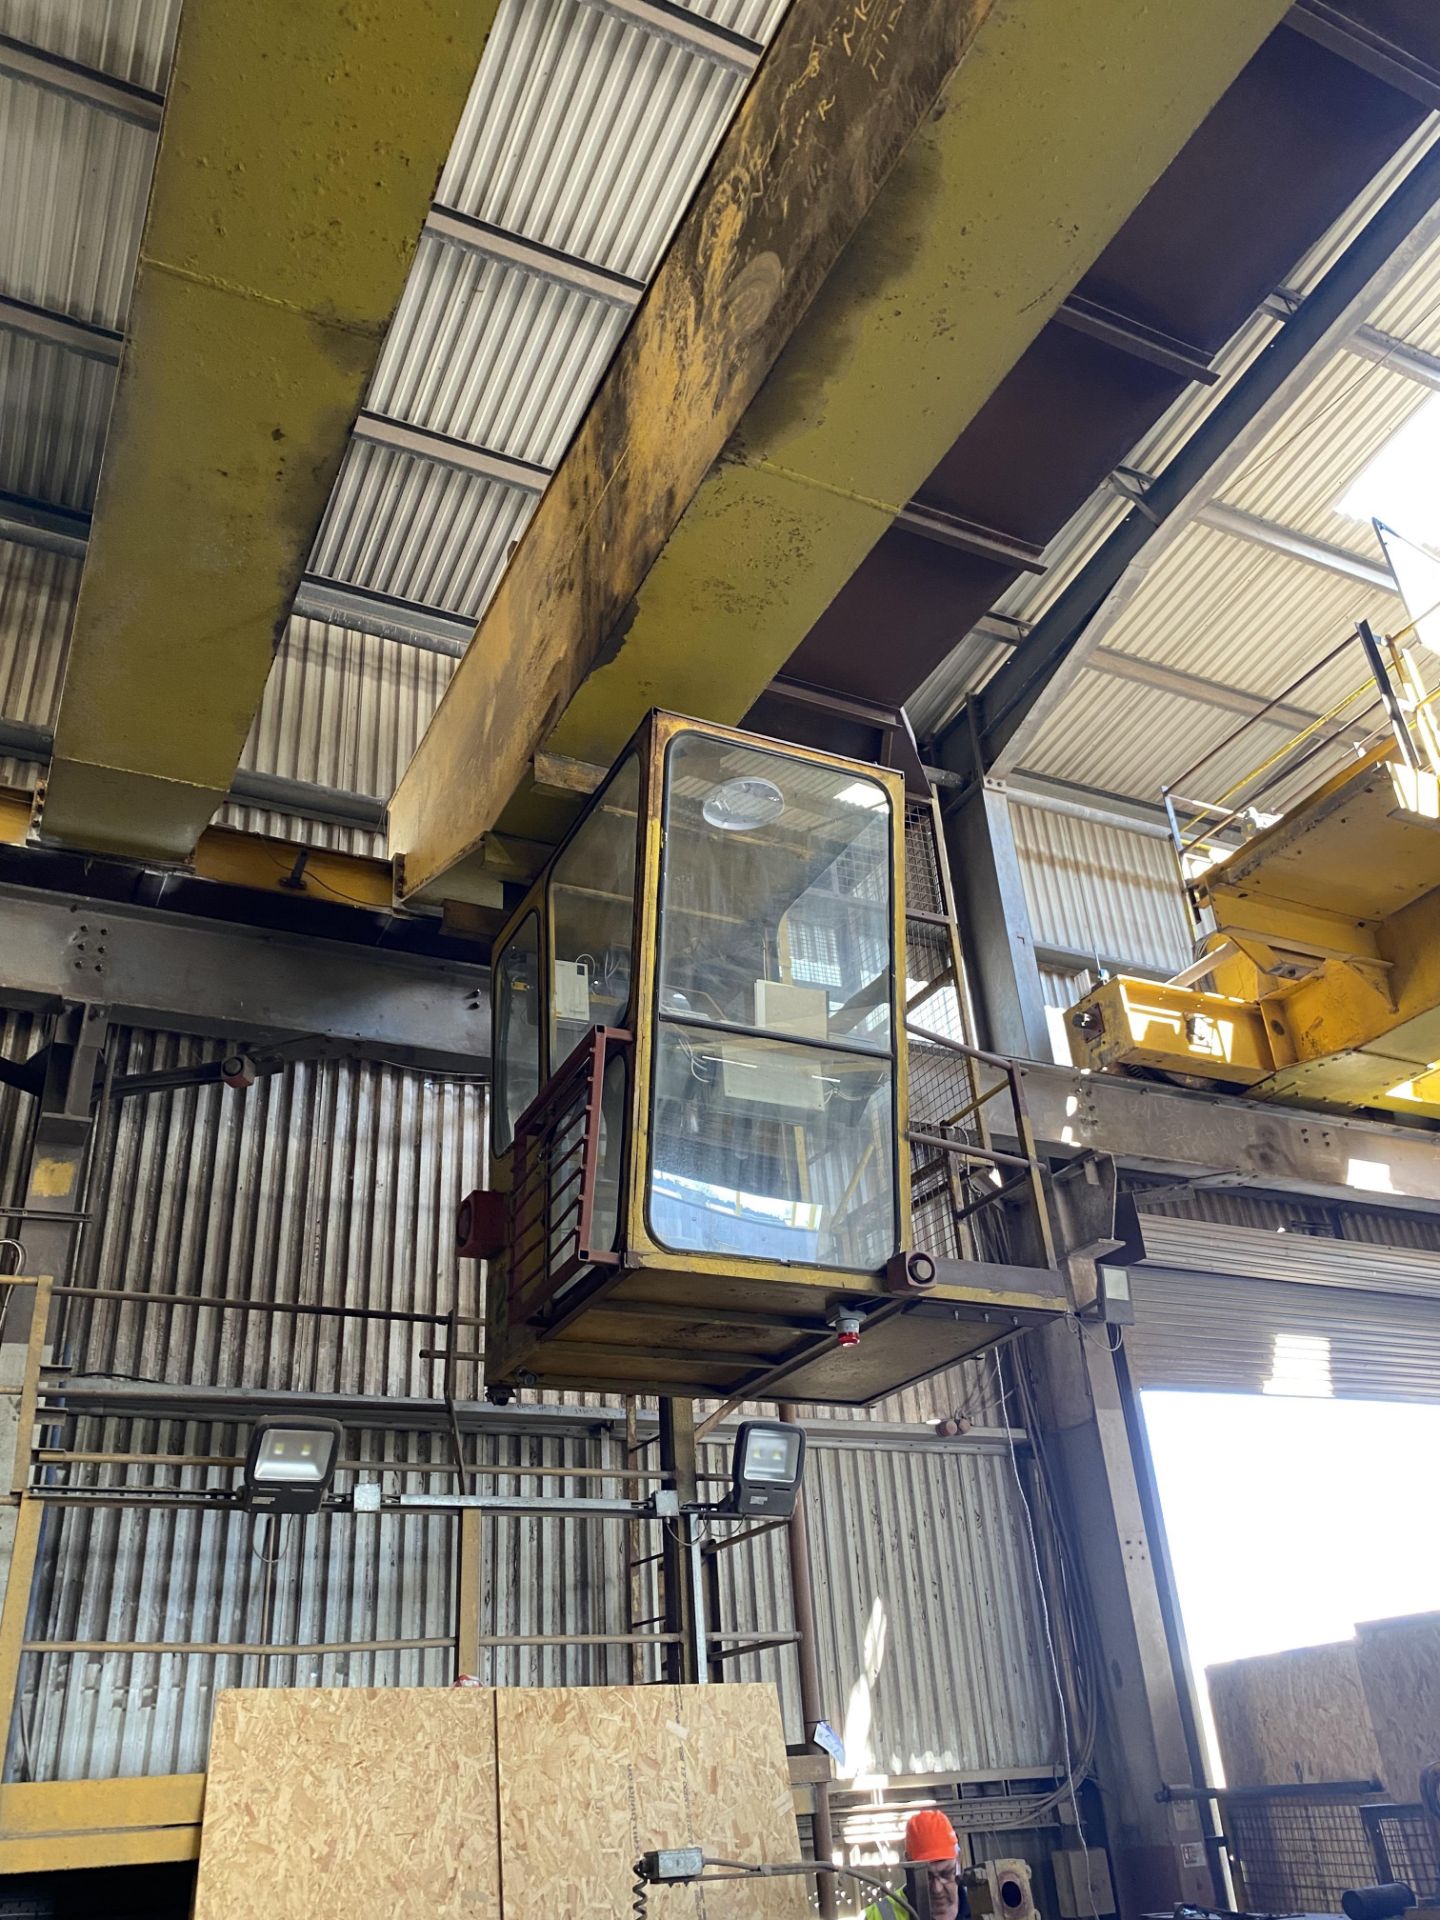 2 x 16,000kg SWL TWIN GIRDER TRAVELLING OVERHEAD CRANE, serial no. AP107(incomplete, no carriages or - Image 5 of 5